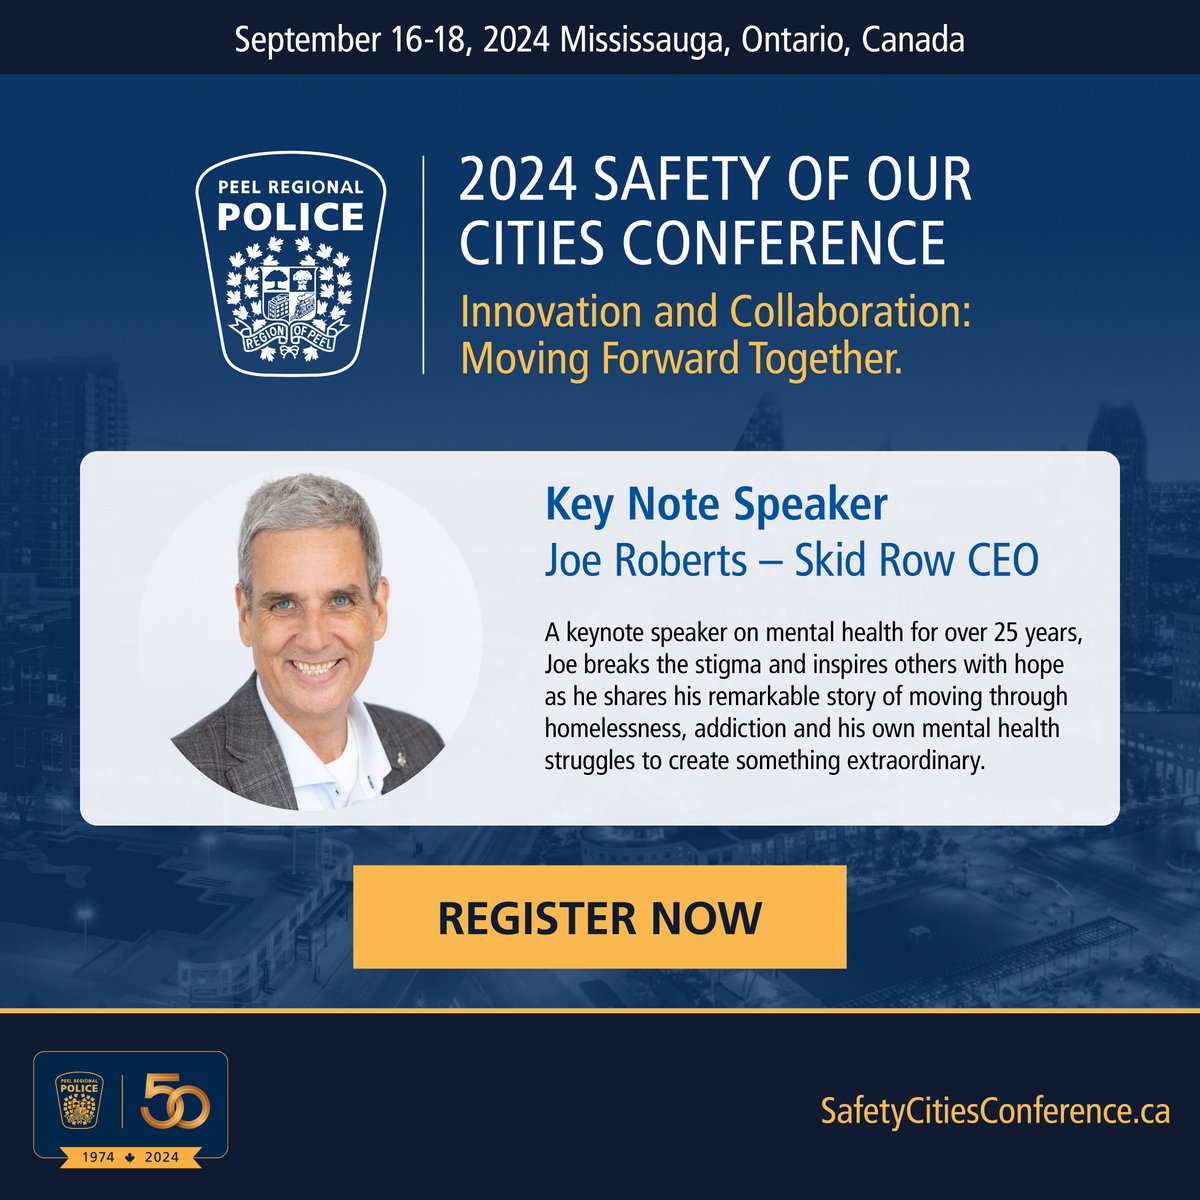 2nd Annual #SafetyofOurCities Conference welcomes keynote speaker Joe Roberts – “Skid Row CEO”. Joe breaks stigma & inspires through his journey from homelessness, addiction & mental health challenges to create something extraordinary. Early bird pricing - $599, register now!